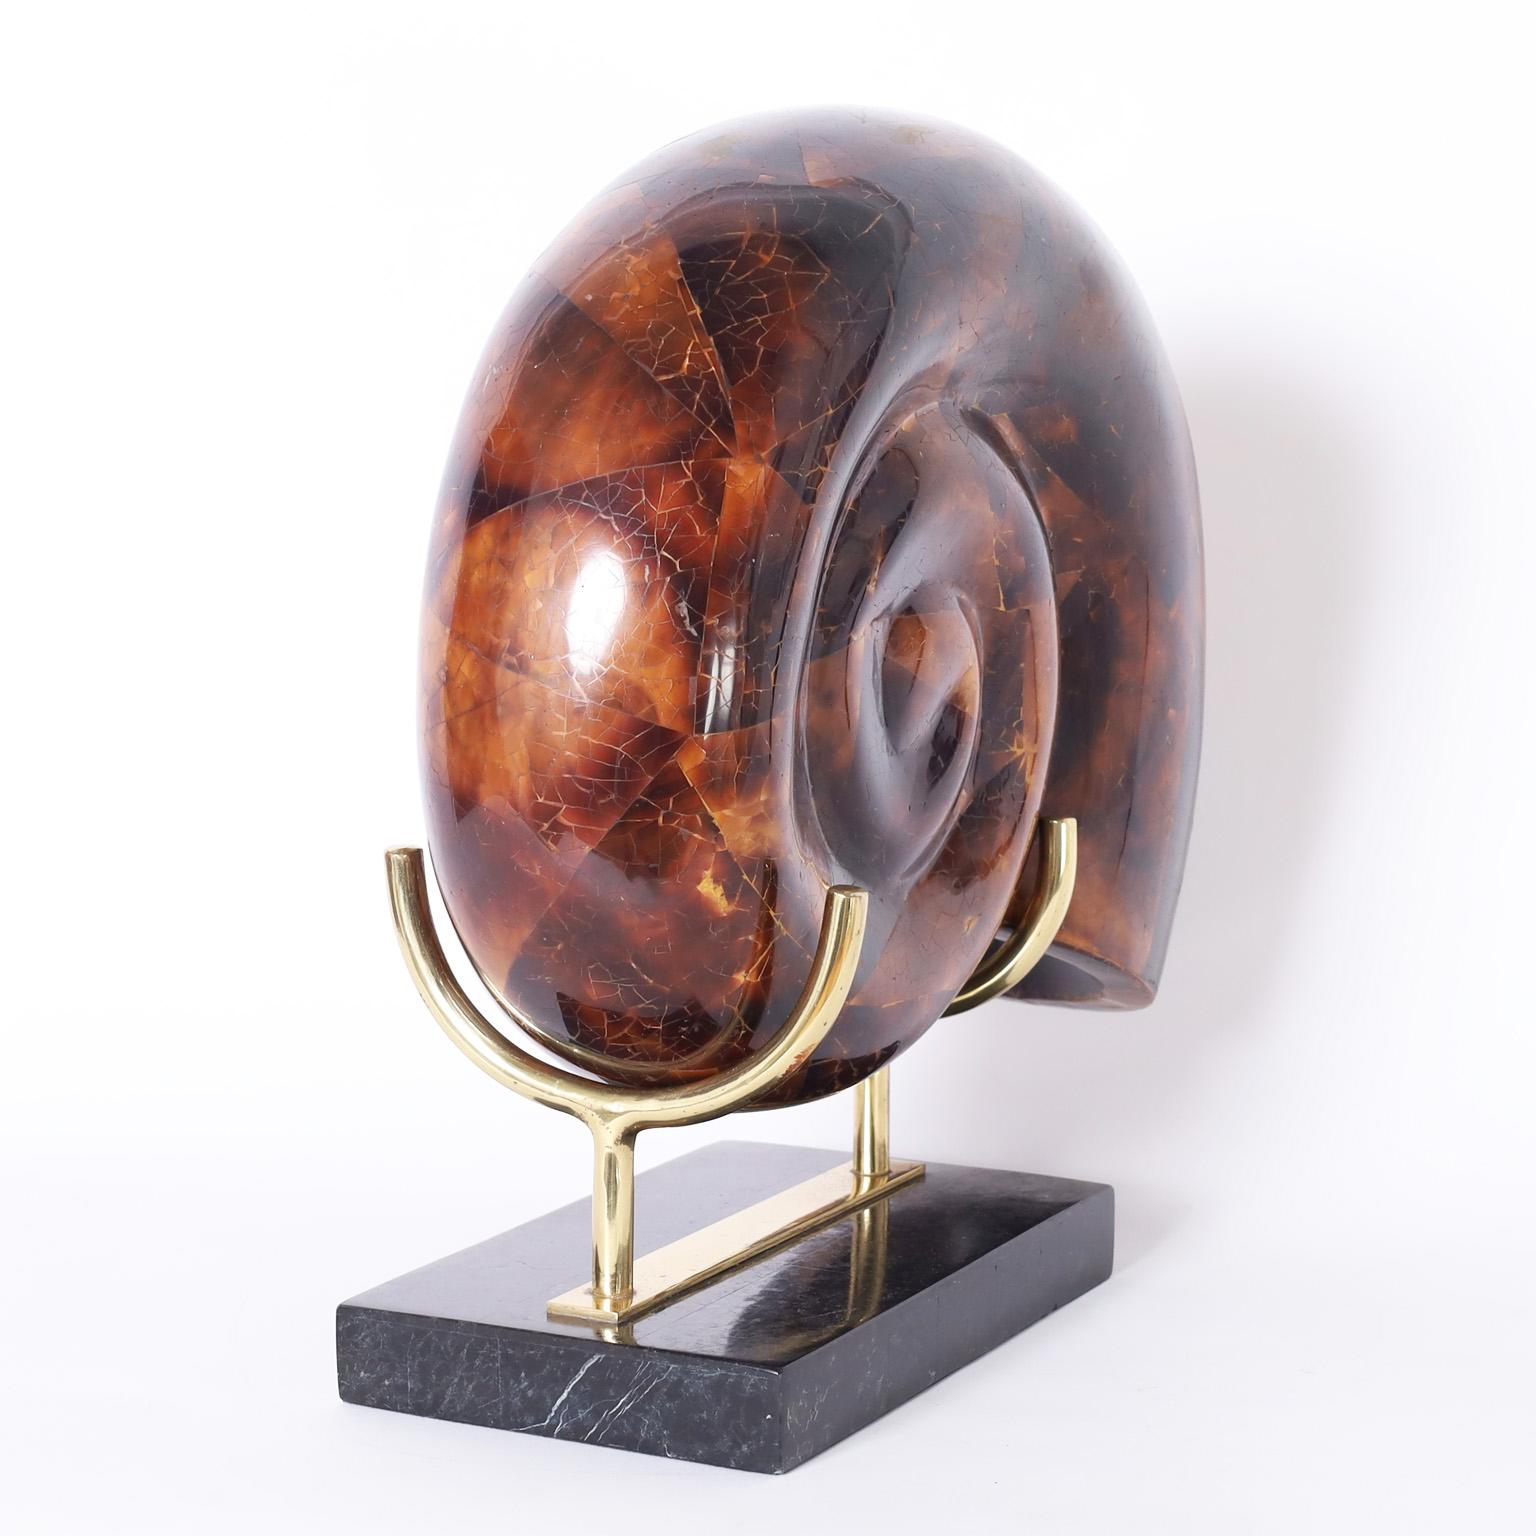 Mid-Century Tessellated Penshell Nautilus on Stand by Maitland-Smith - Modern Sculpture by Unknown